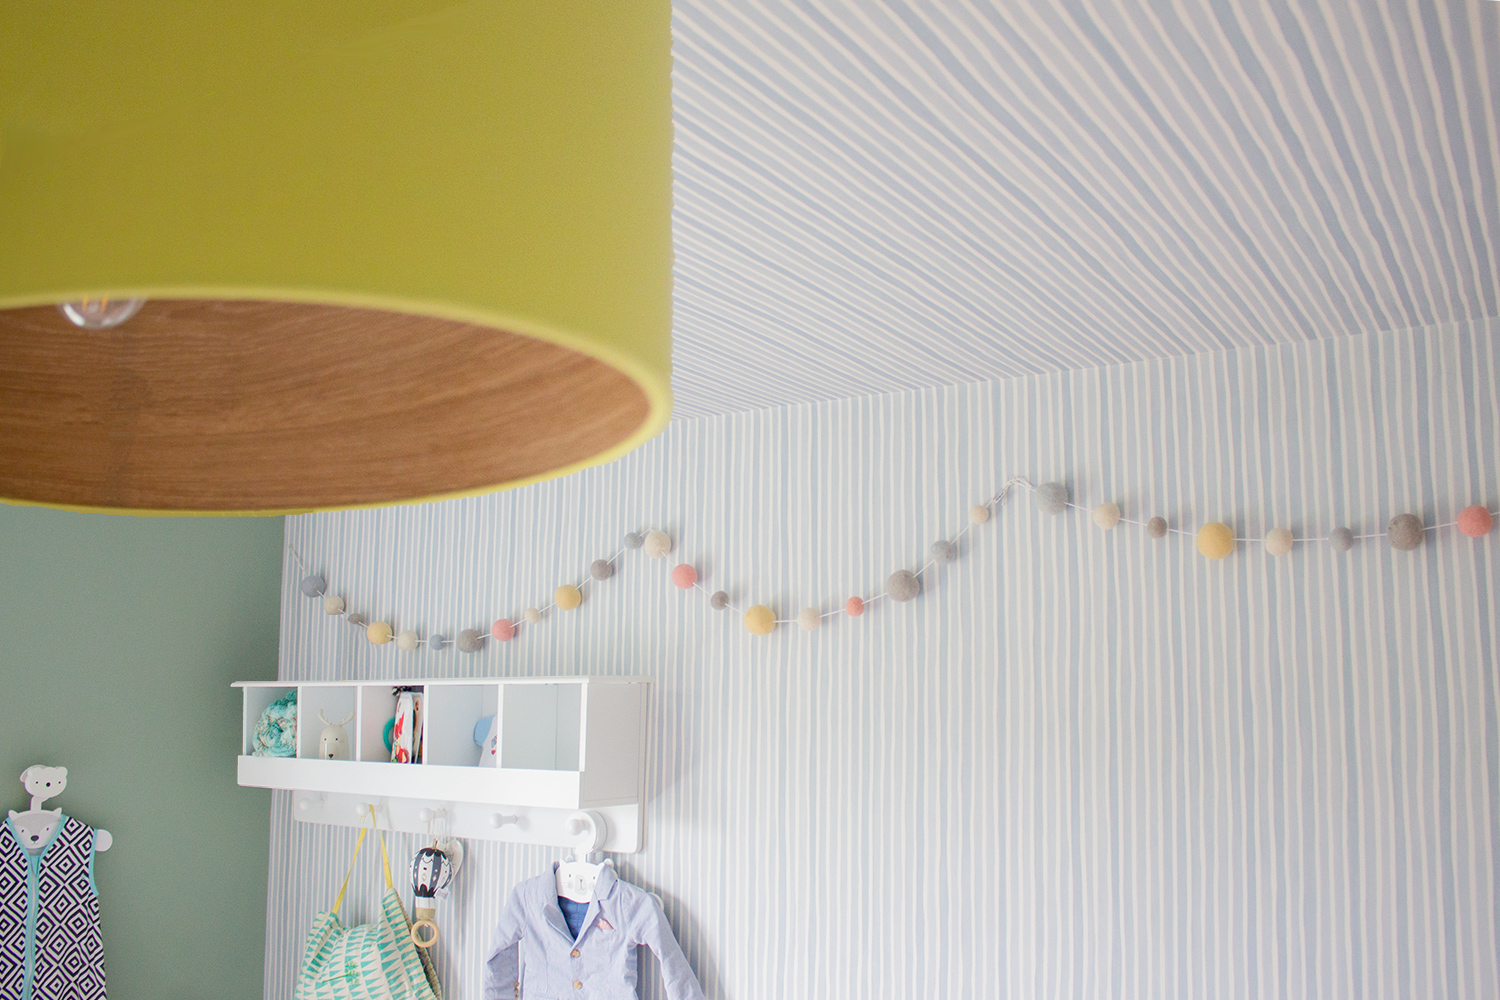 A photo of the nursery shwoing the striped wallpaper going up one wall and continuing on to the ceiling.